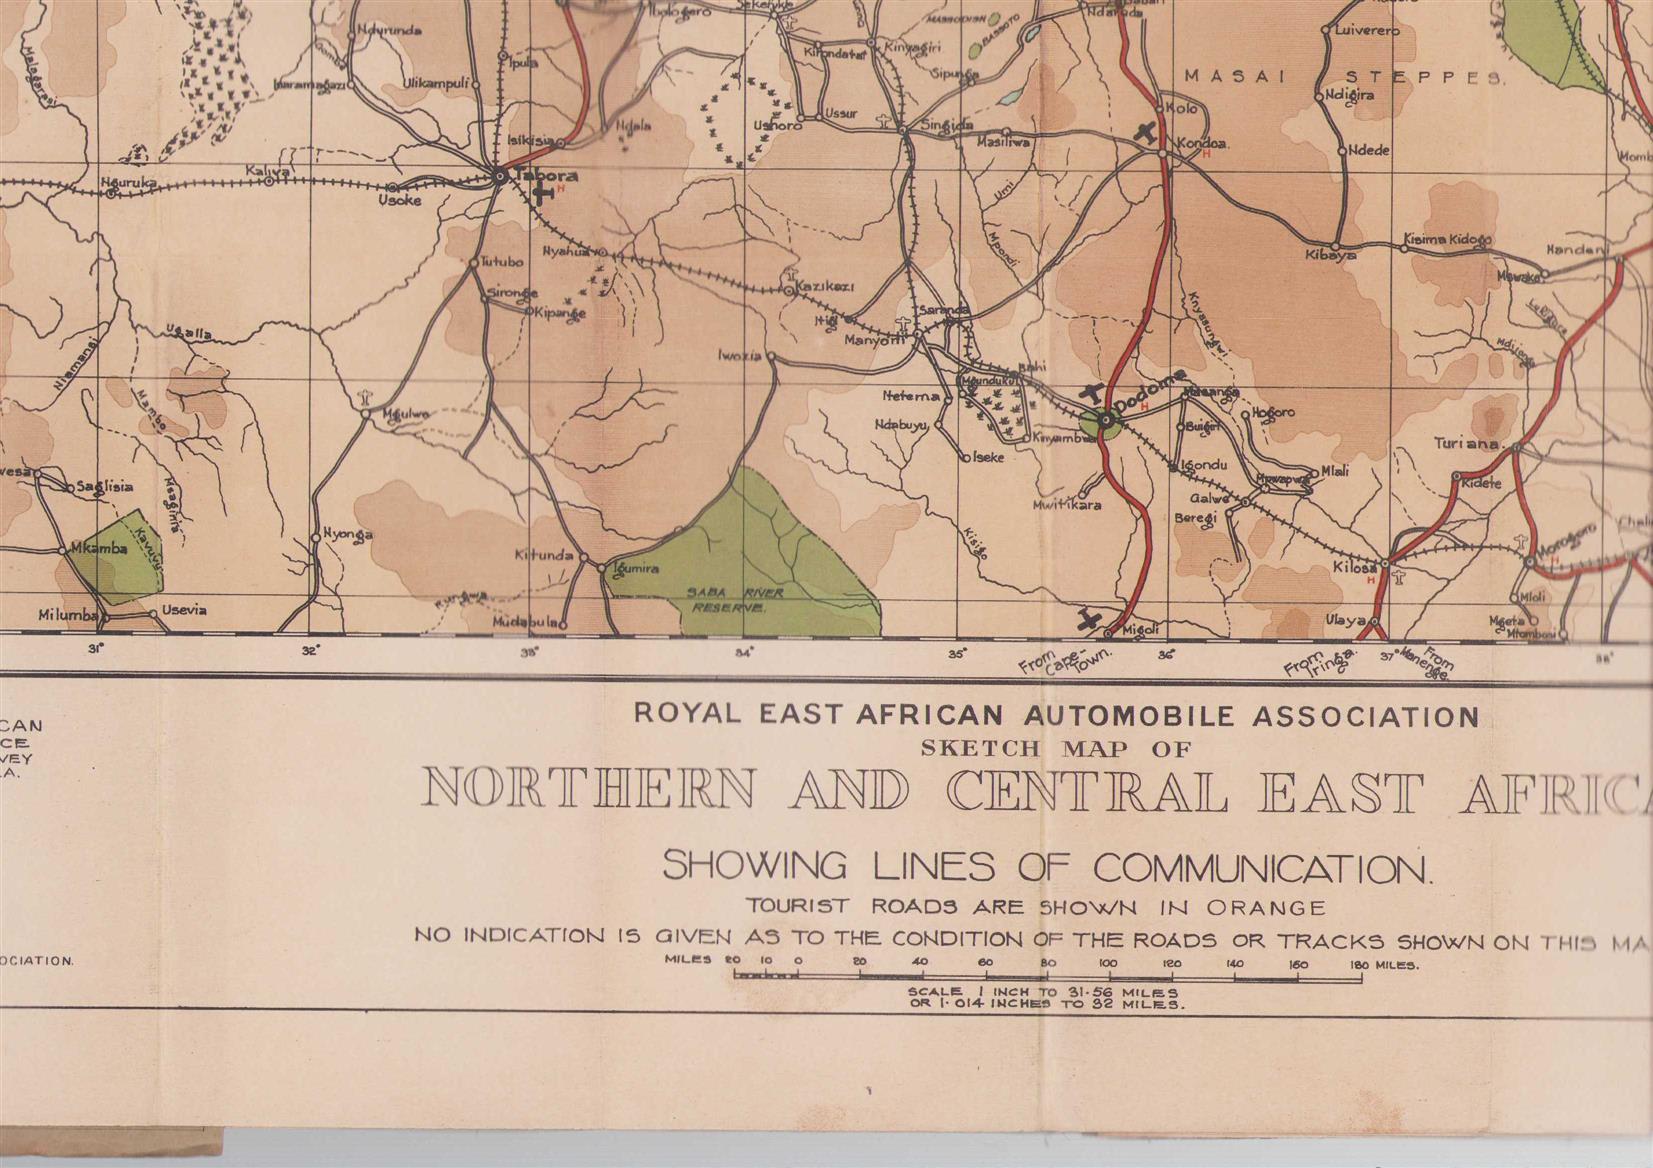 Royal East Africa Automobile Association. - Road map of East Africa - Showing adjacent roads in the Belgian Congo, The Sudan, Abyssinia and Italian Somaliland.